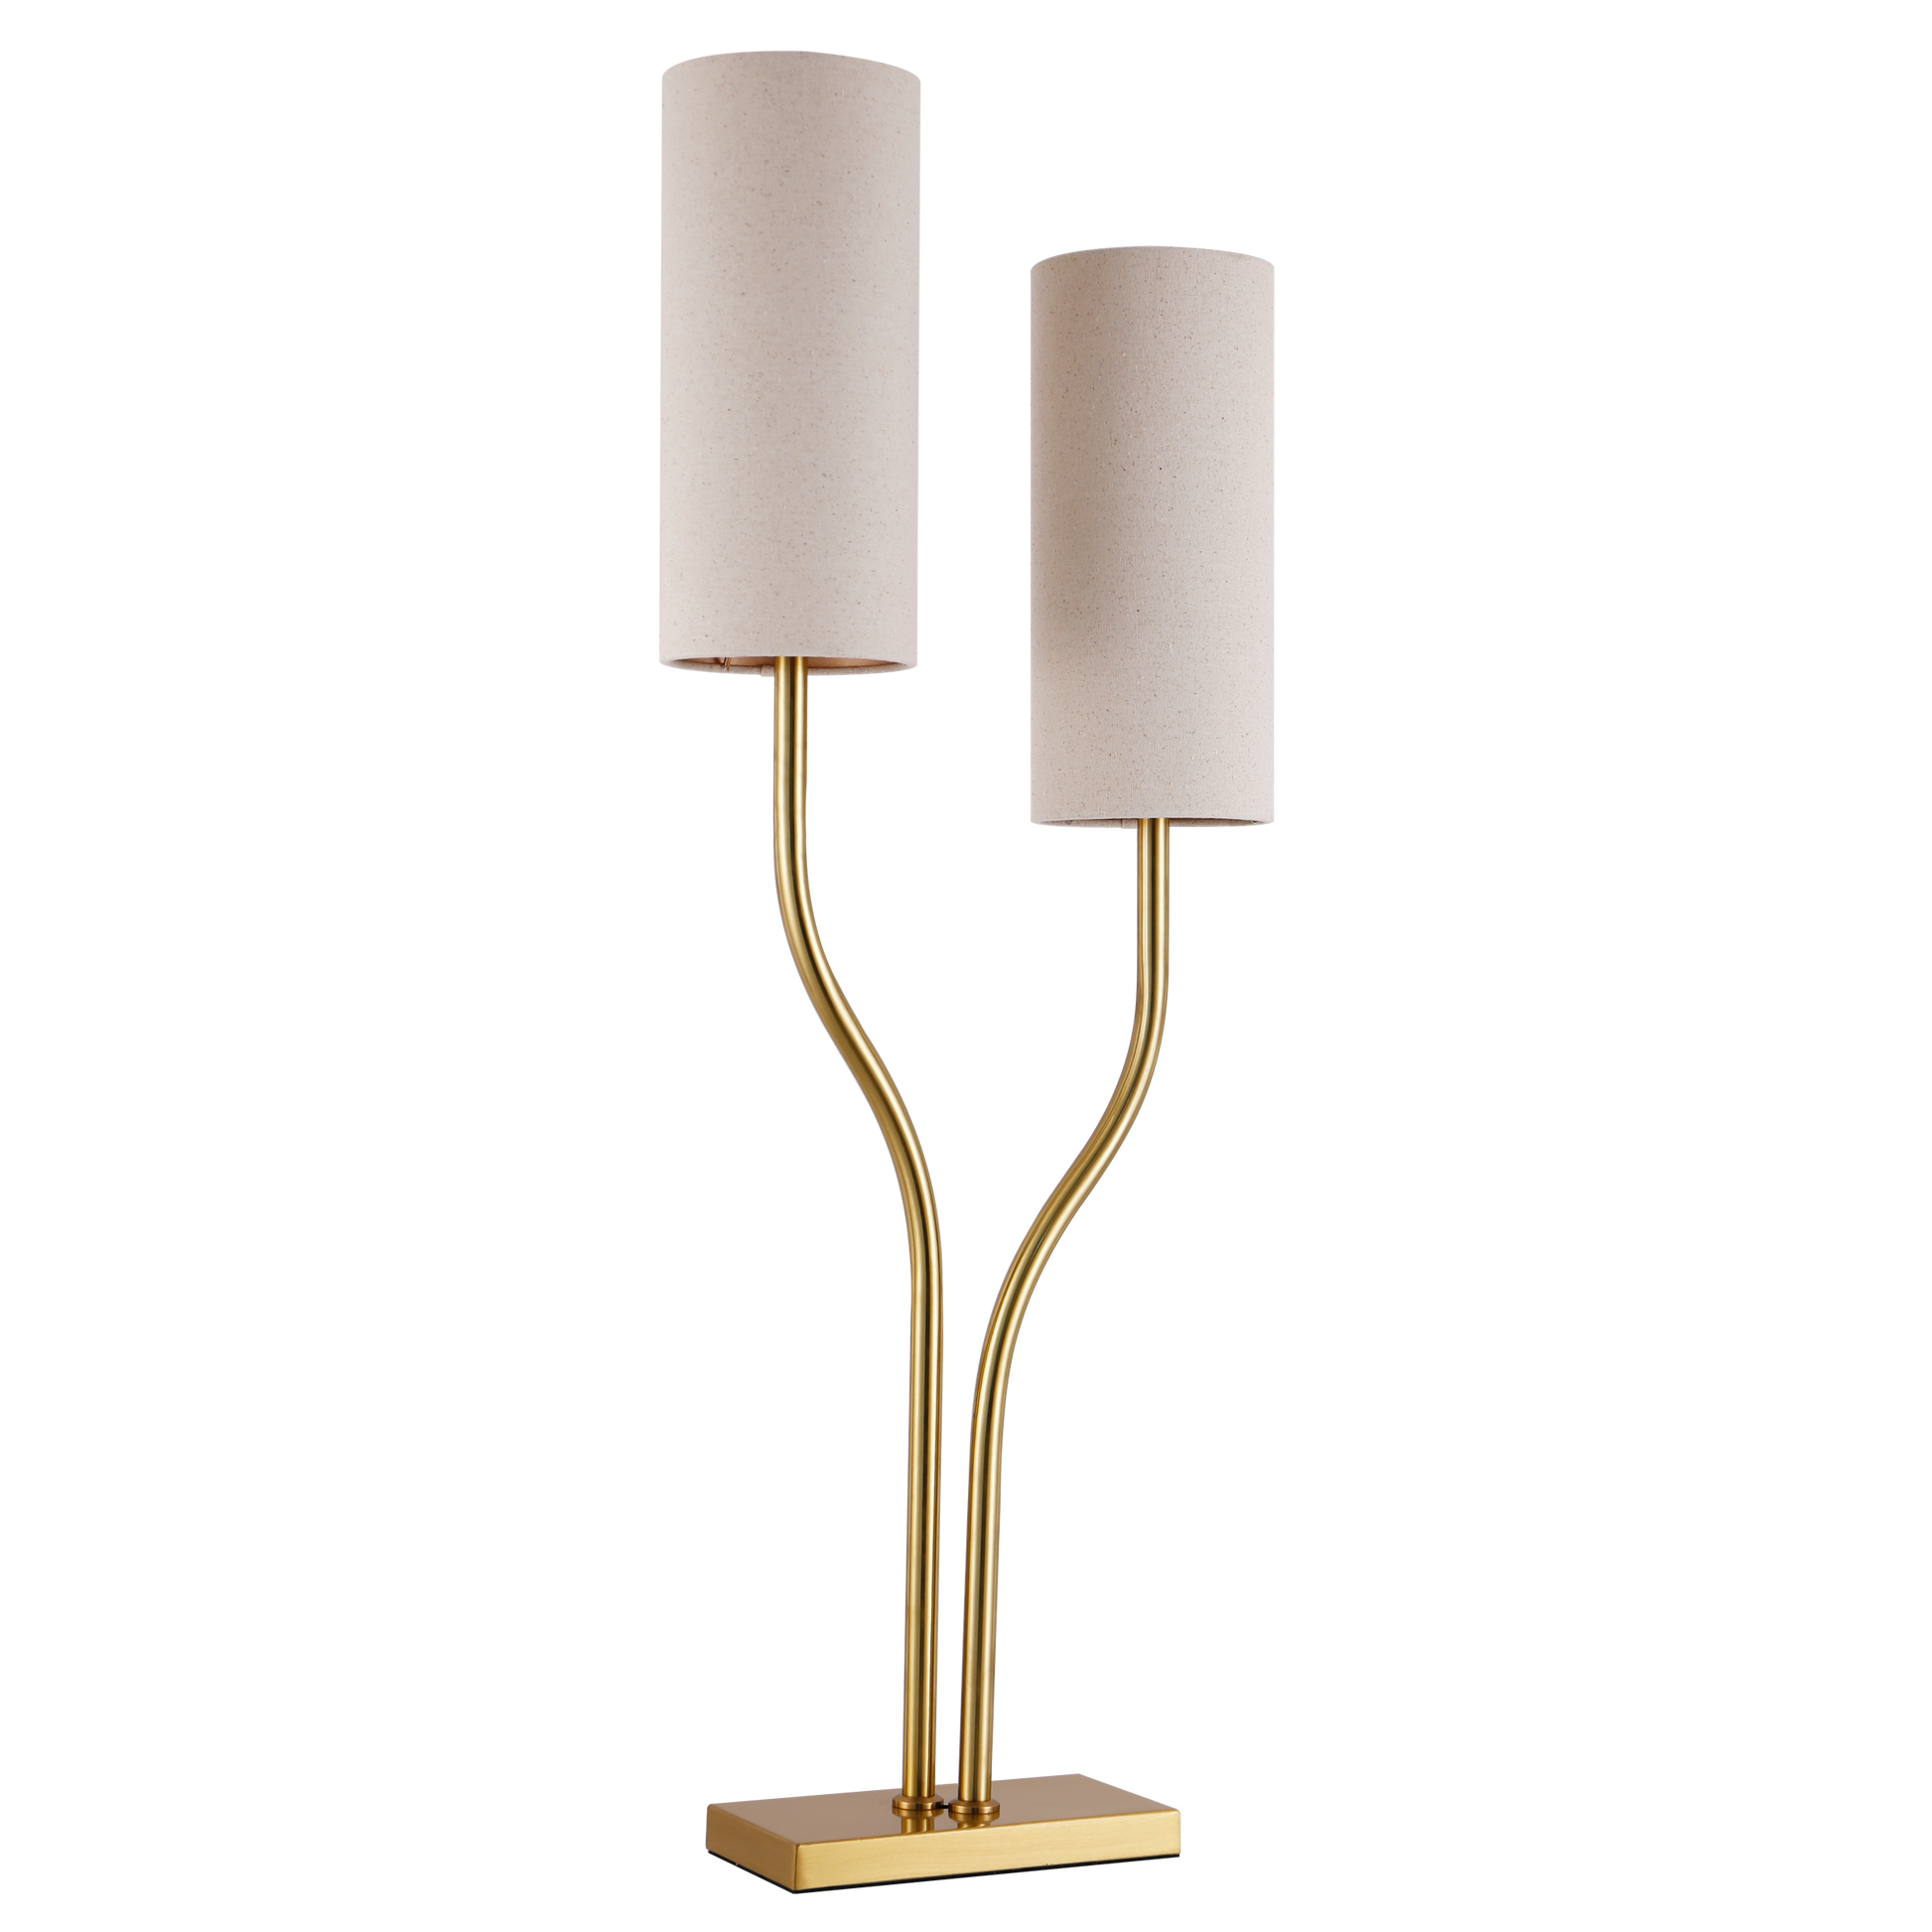 Table Lamps, Statement lamp, Decor, Pink lamps, Gold lamps